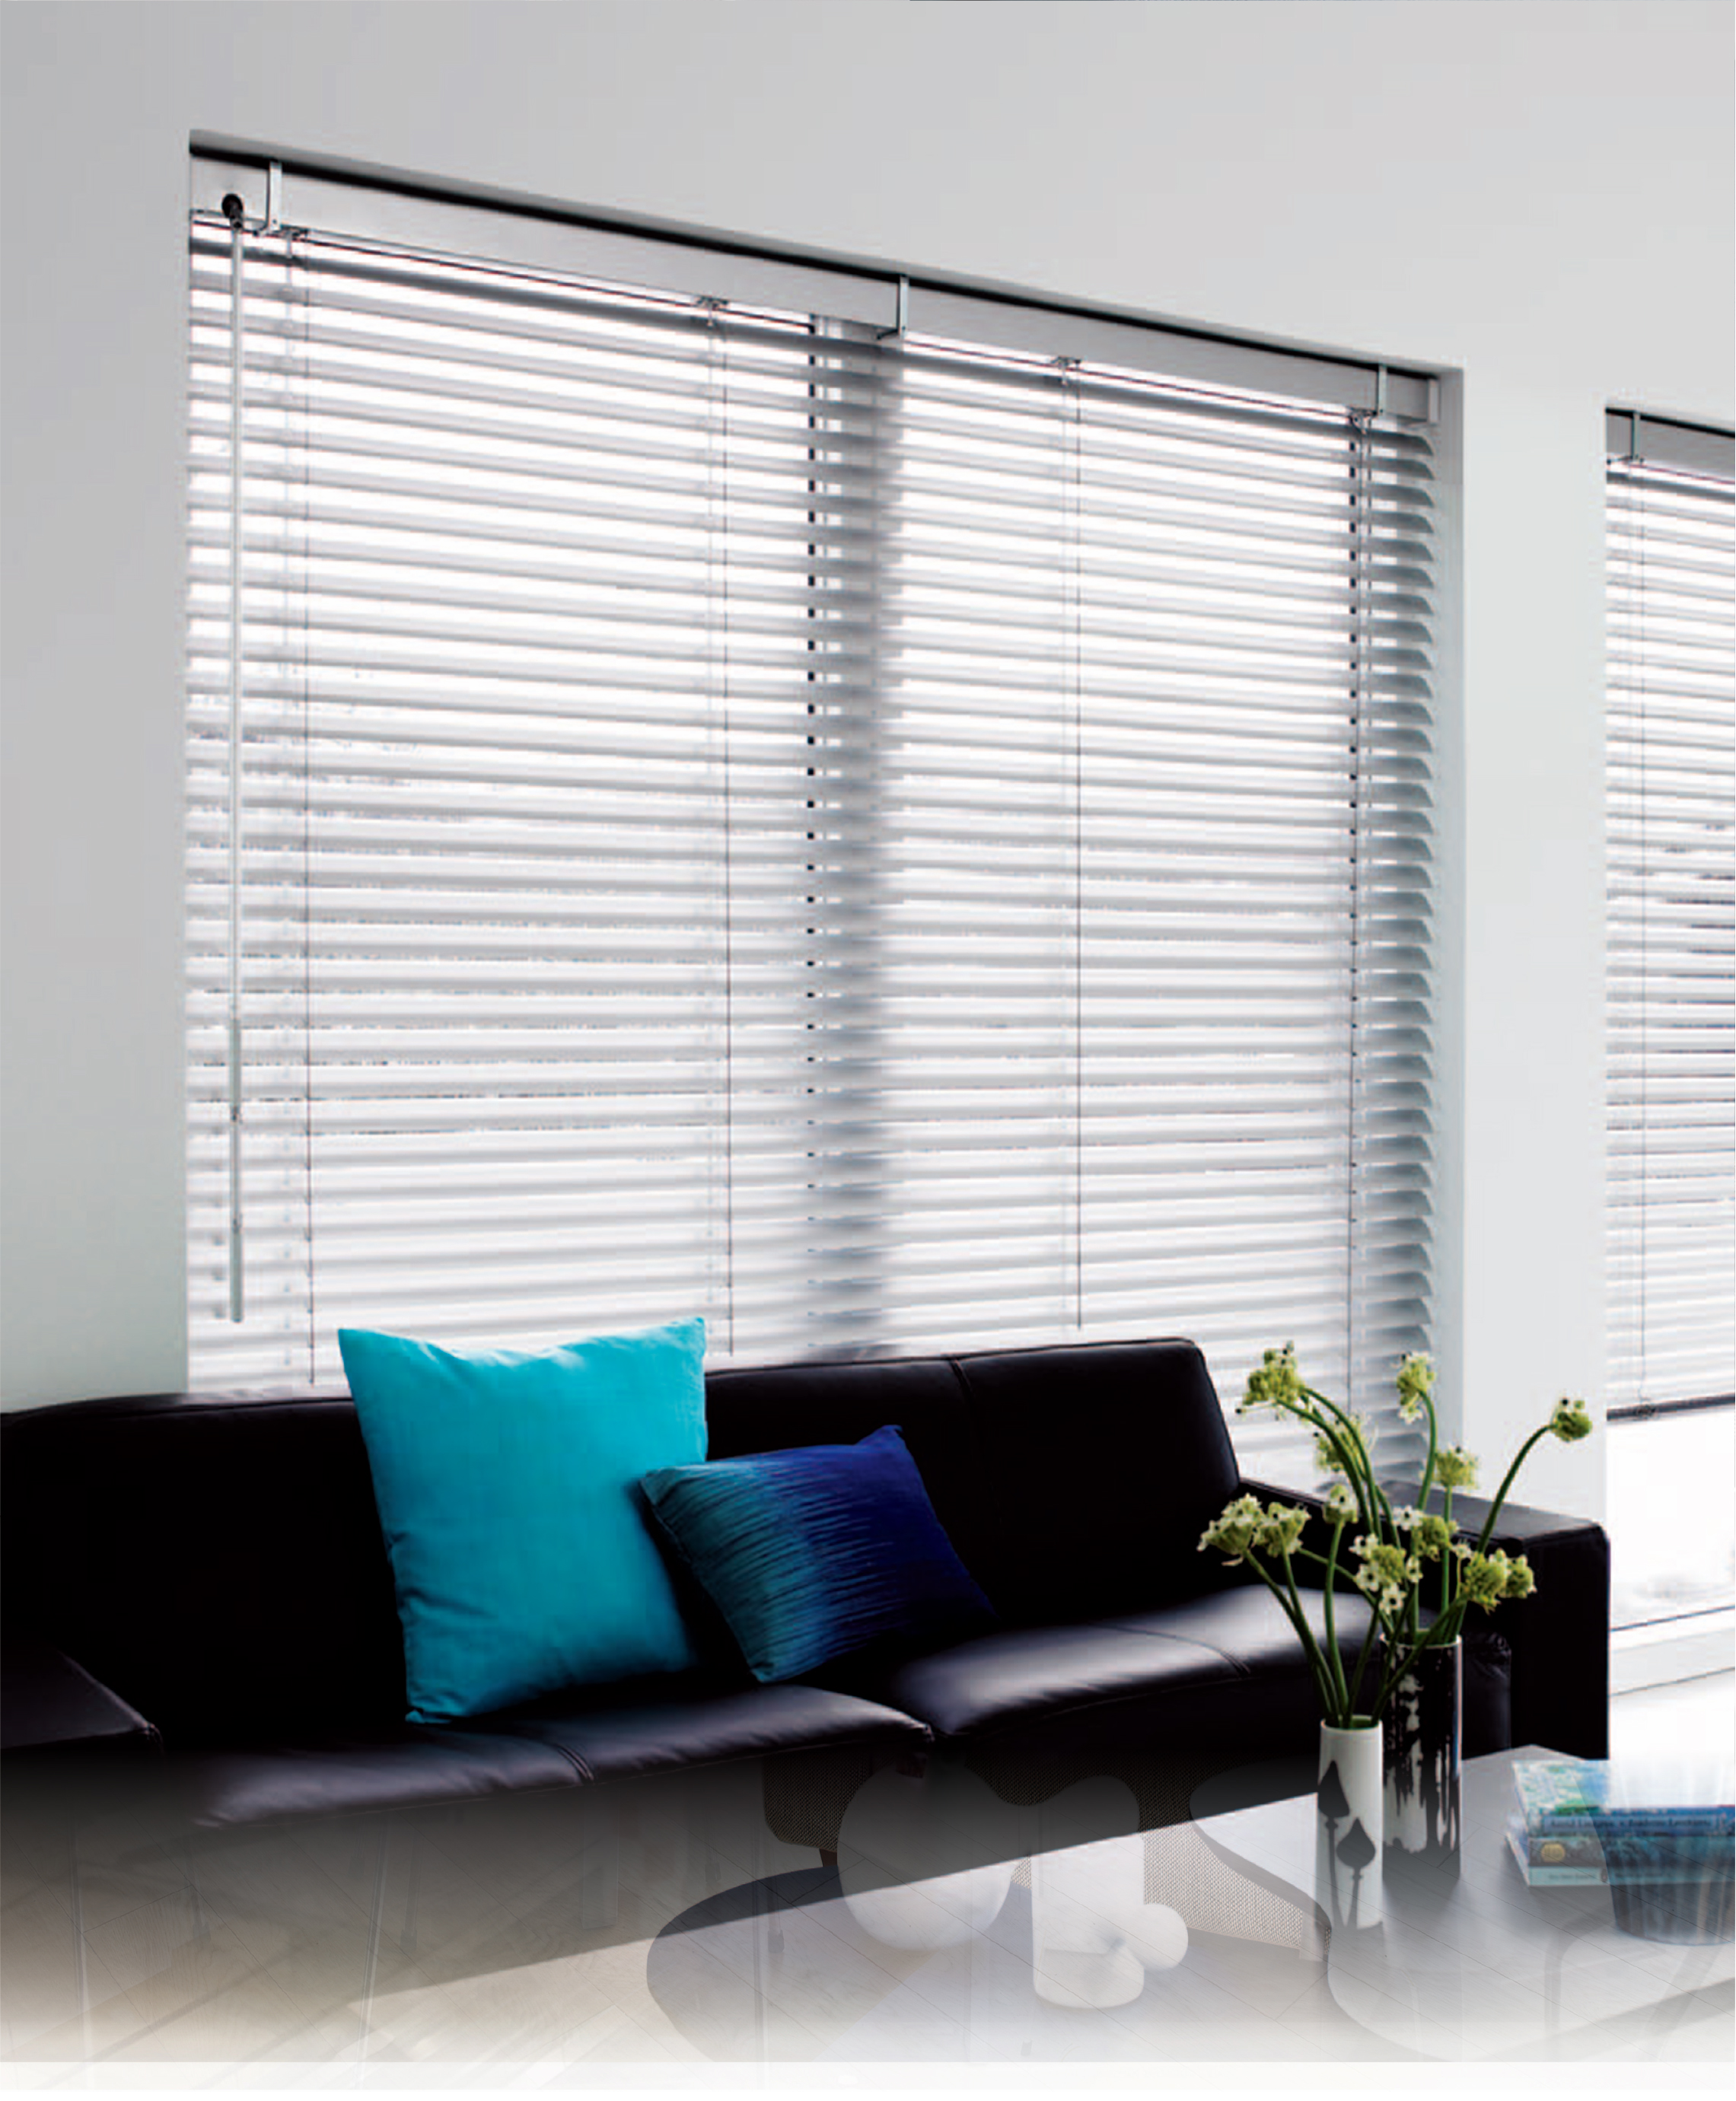 Will a set of wooden blinds help to suit all your home decor needs?